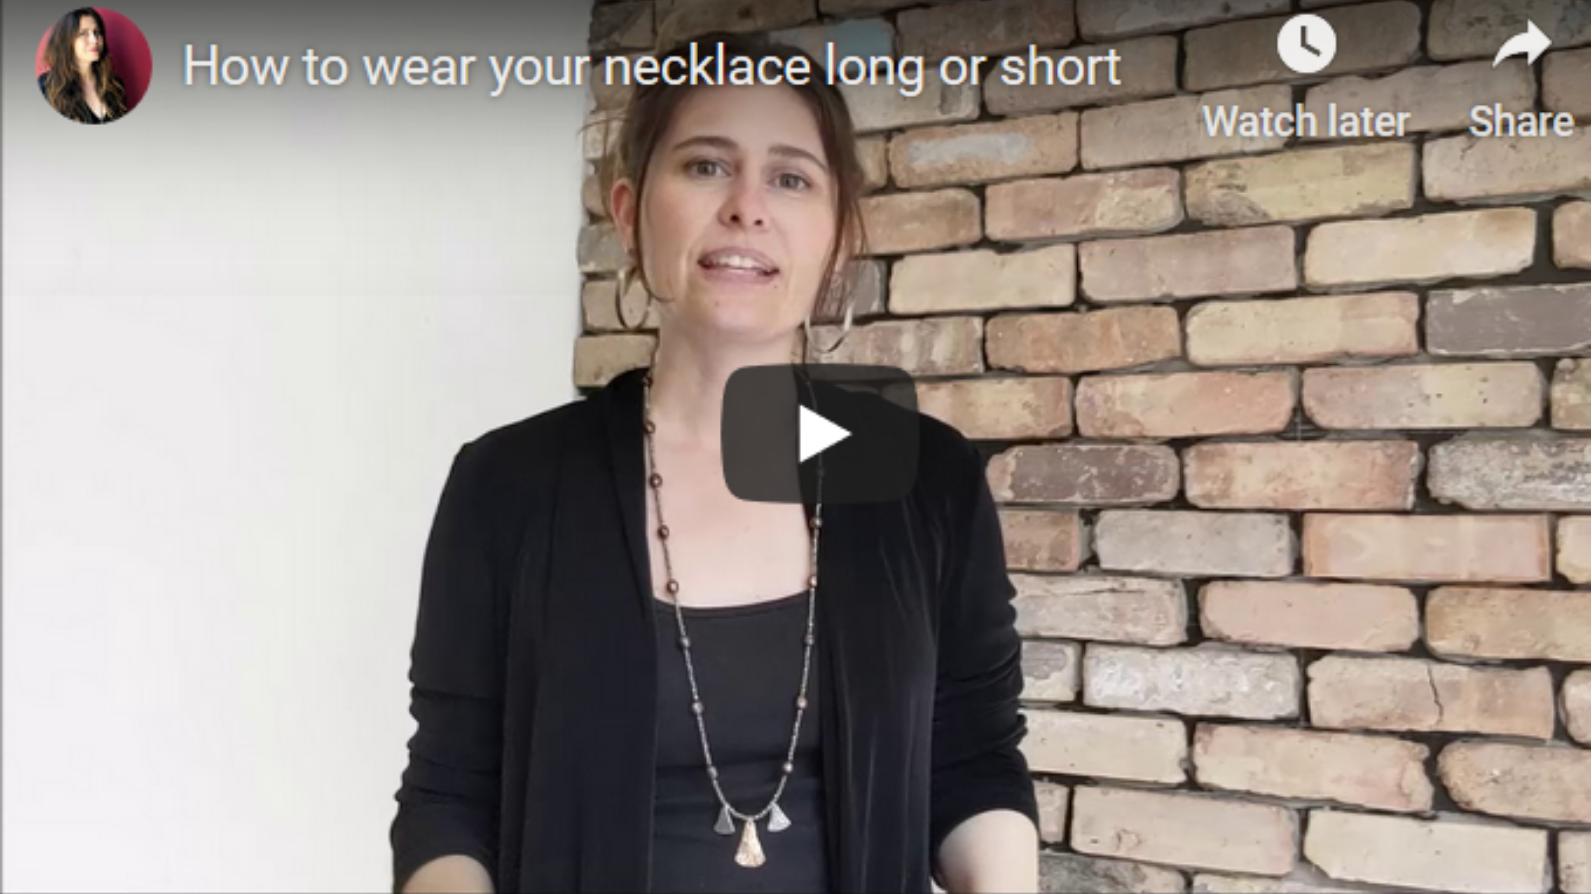 How to wear a long necklace